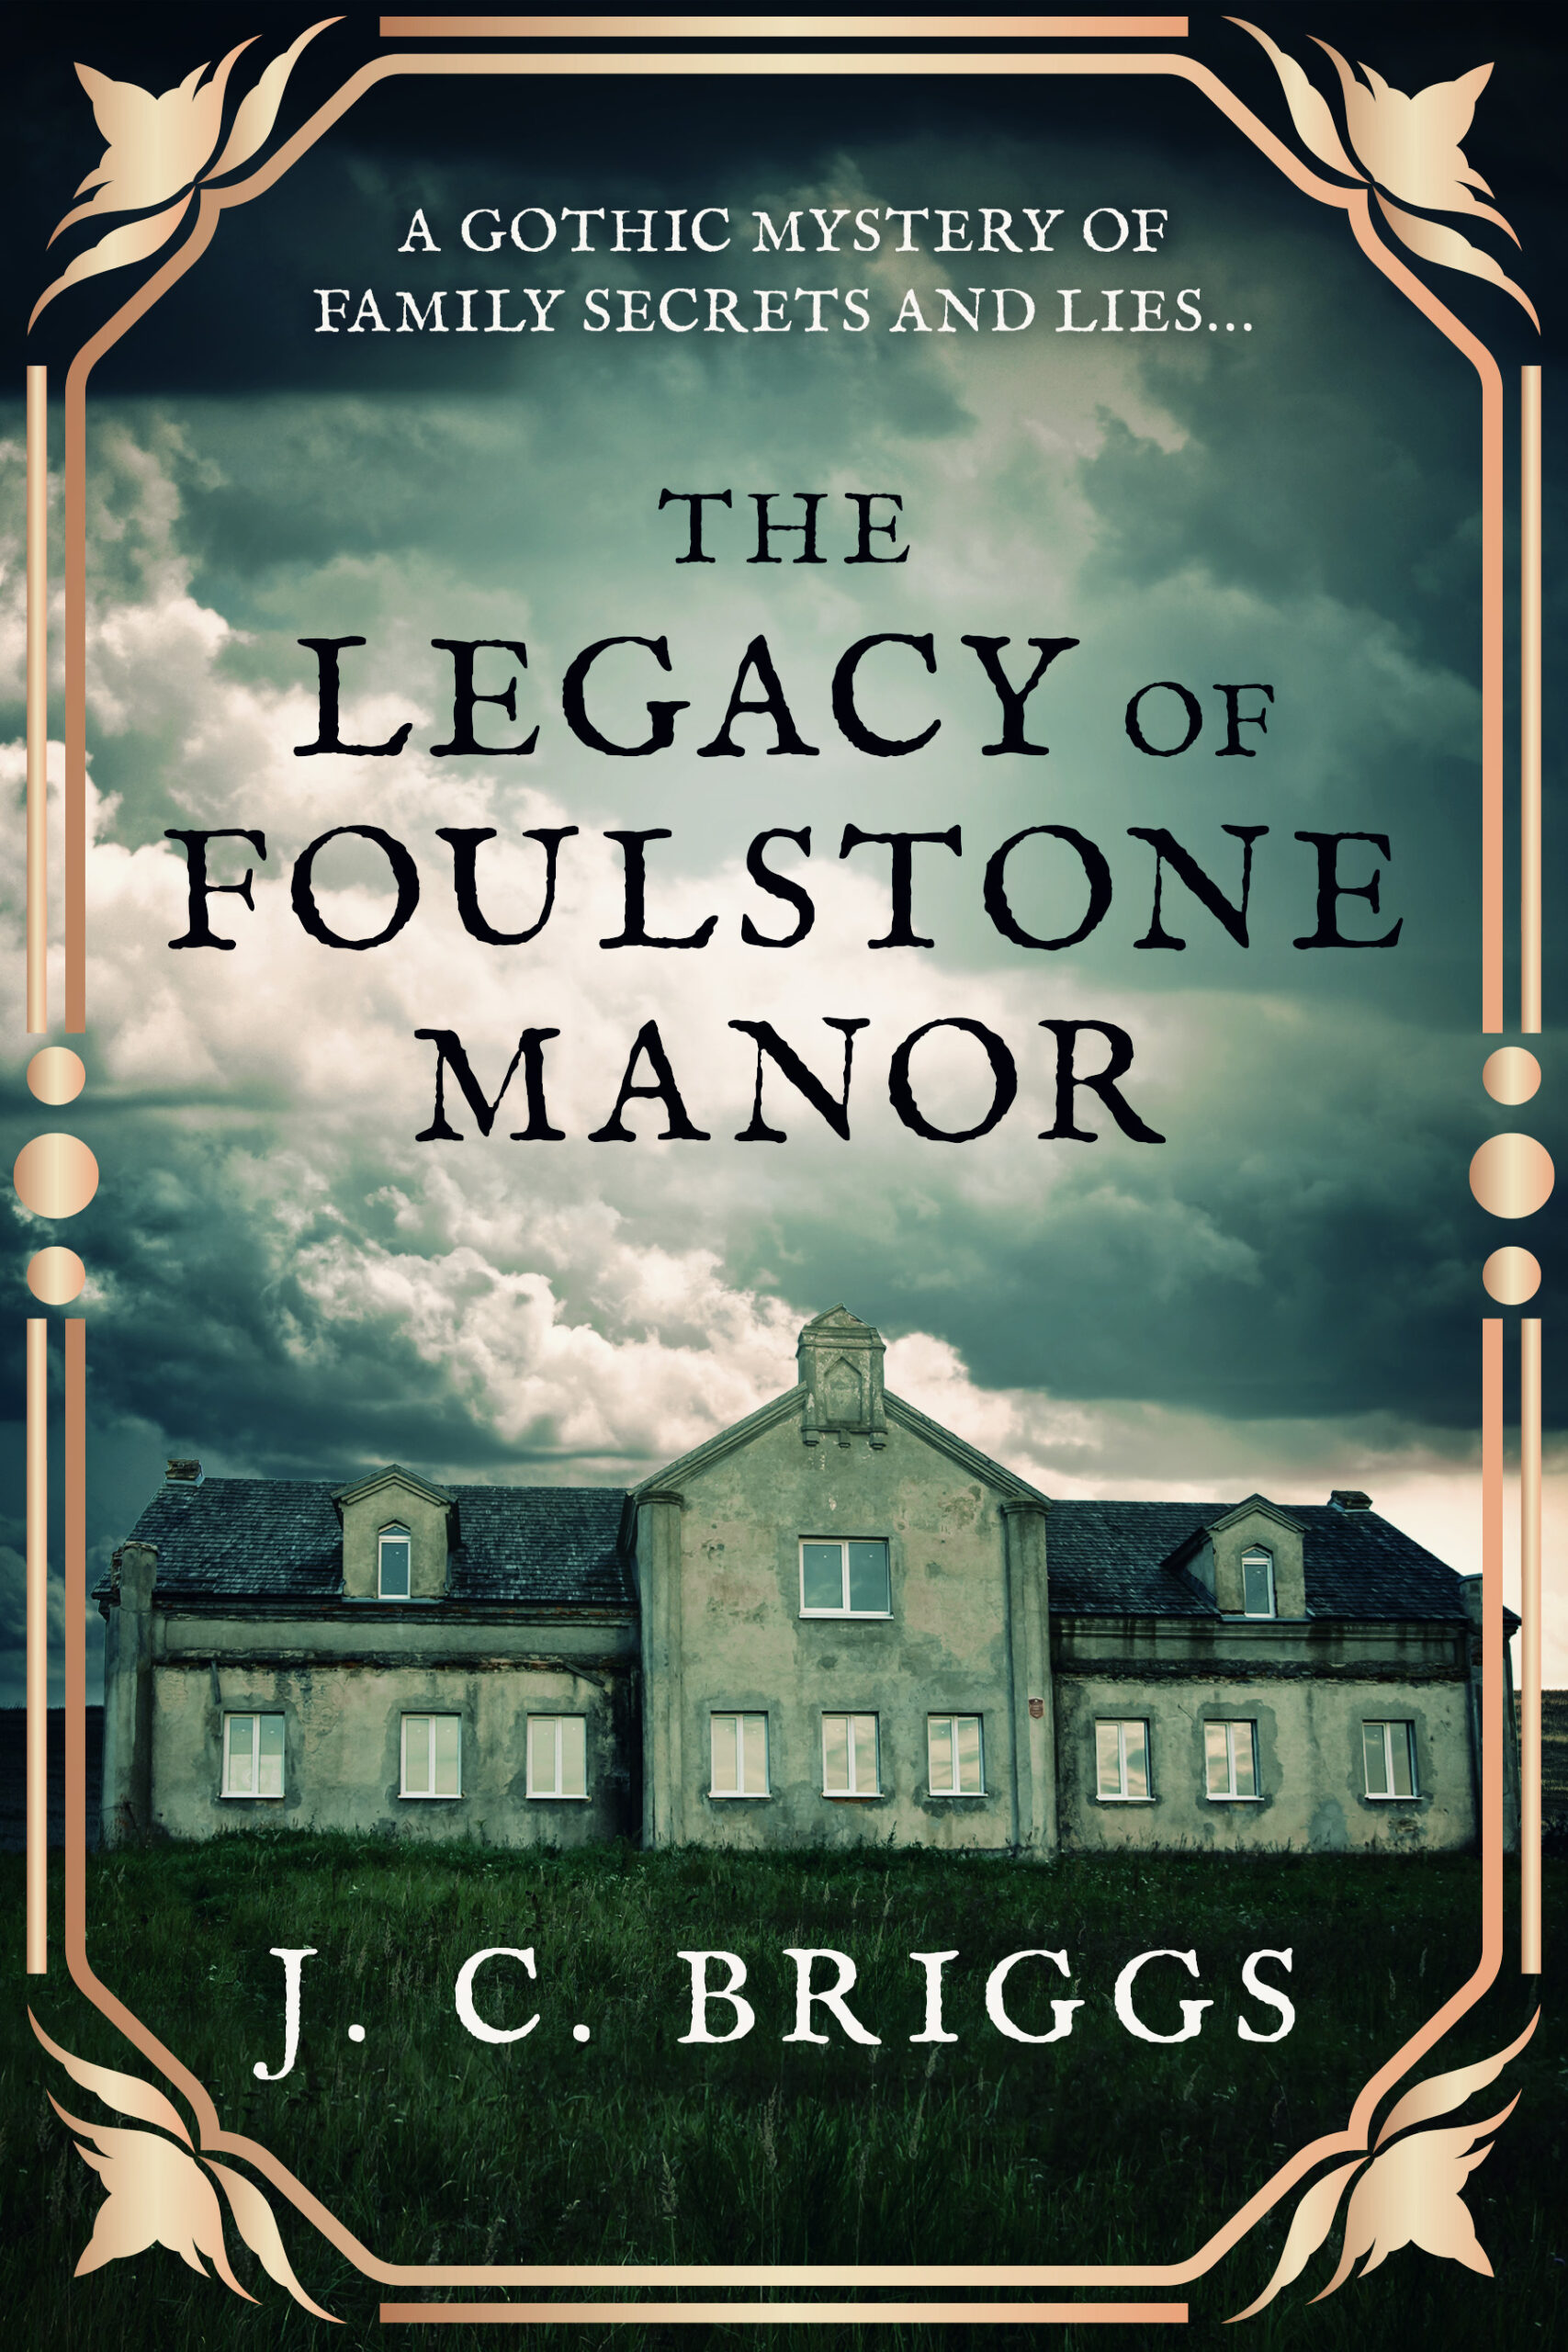 Book cover for The Legacy of Foulstone Manor for J C Briggs